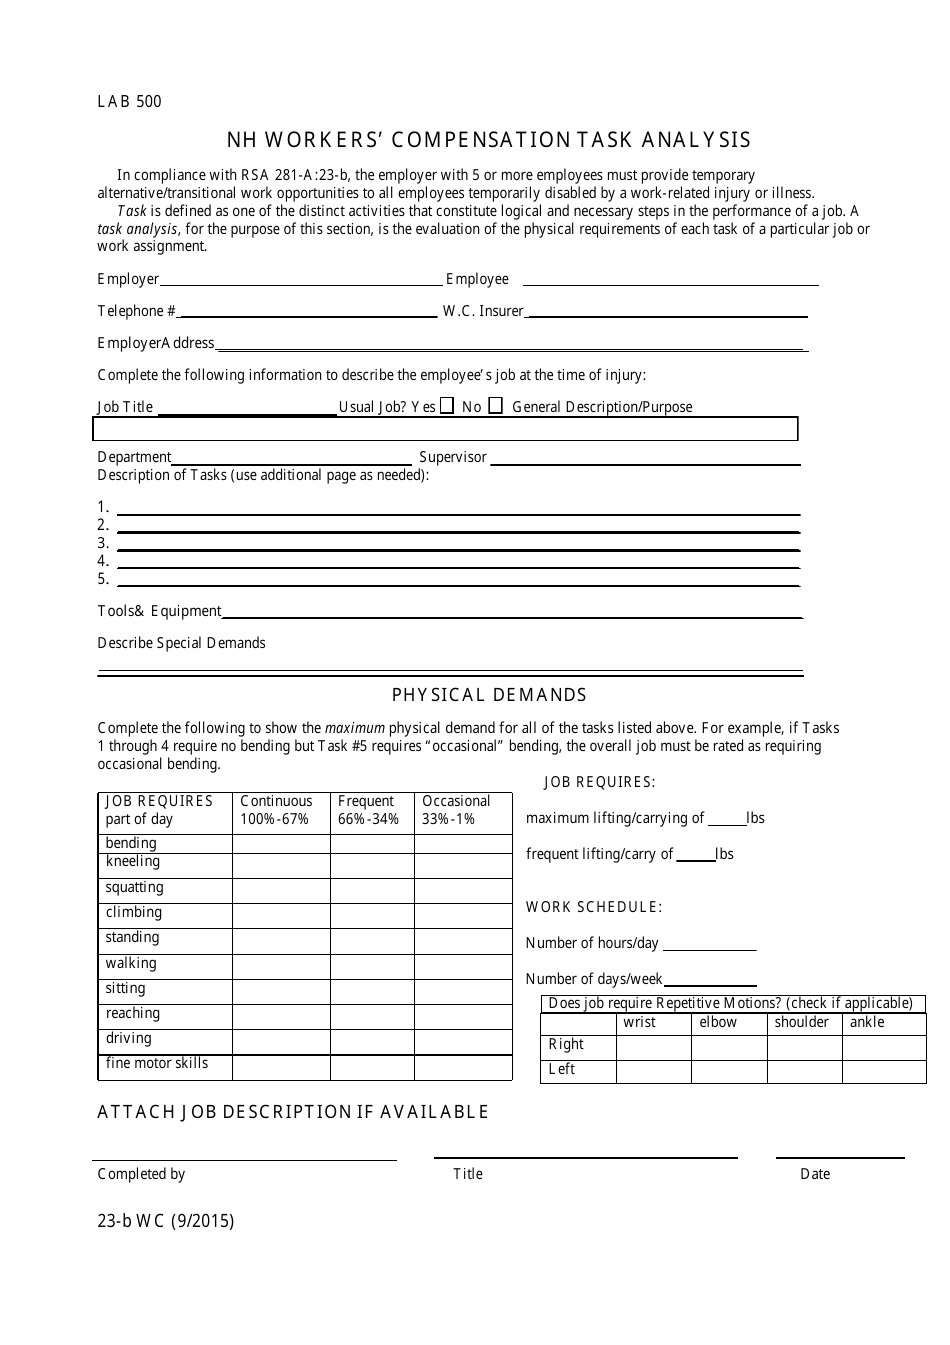 Form 23-B WC Nh Workers Compensation Task Analysis - New Hampshire, Page 1